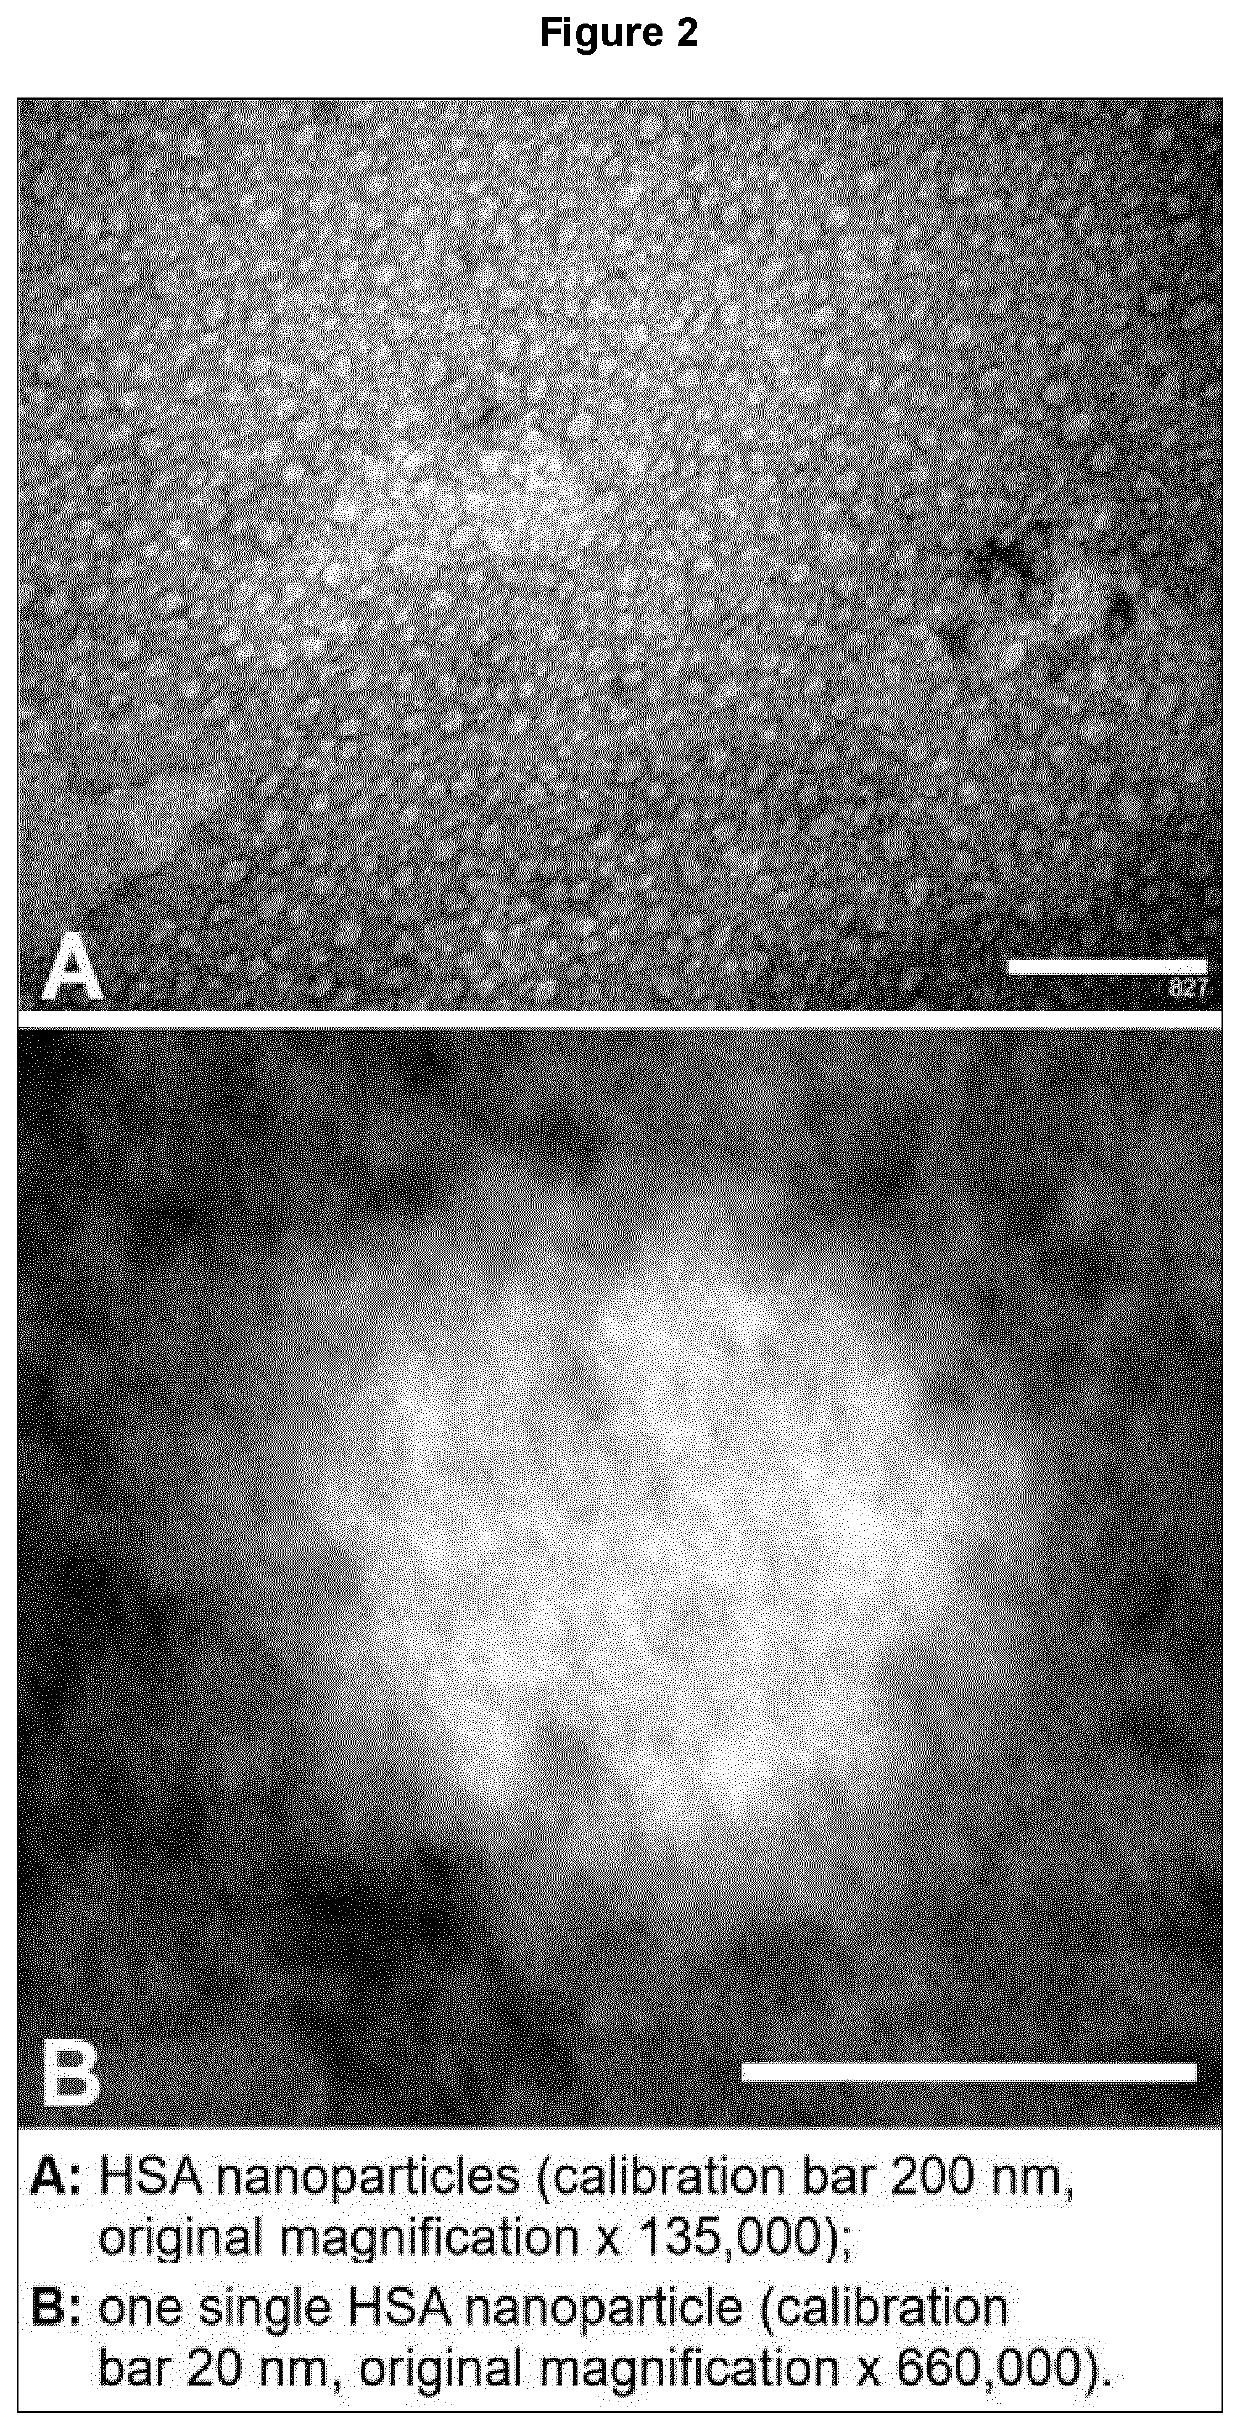 Targeted Nanoparticles of Well-Defined and Reproducible Sizes